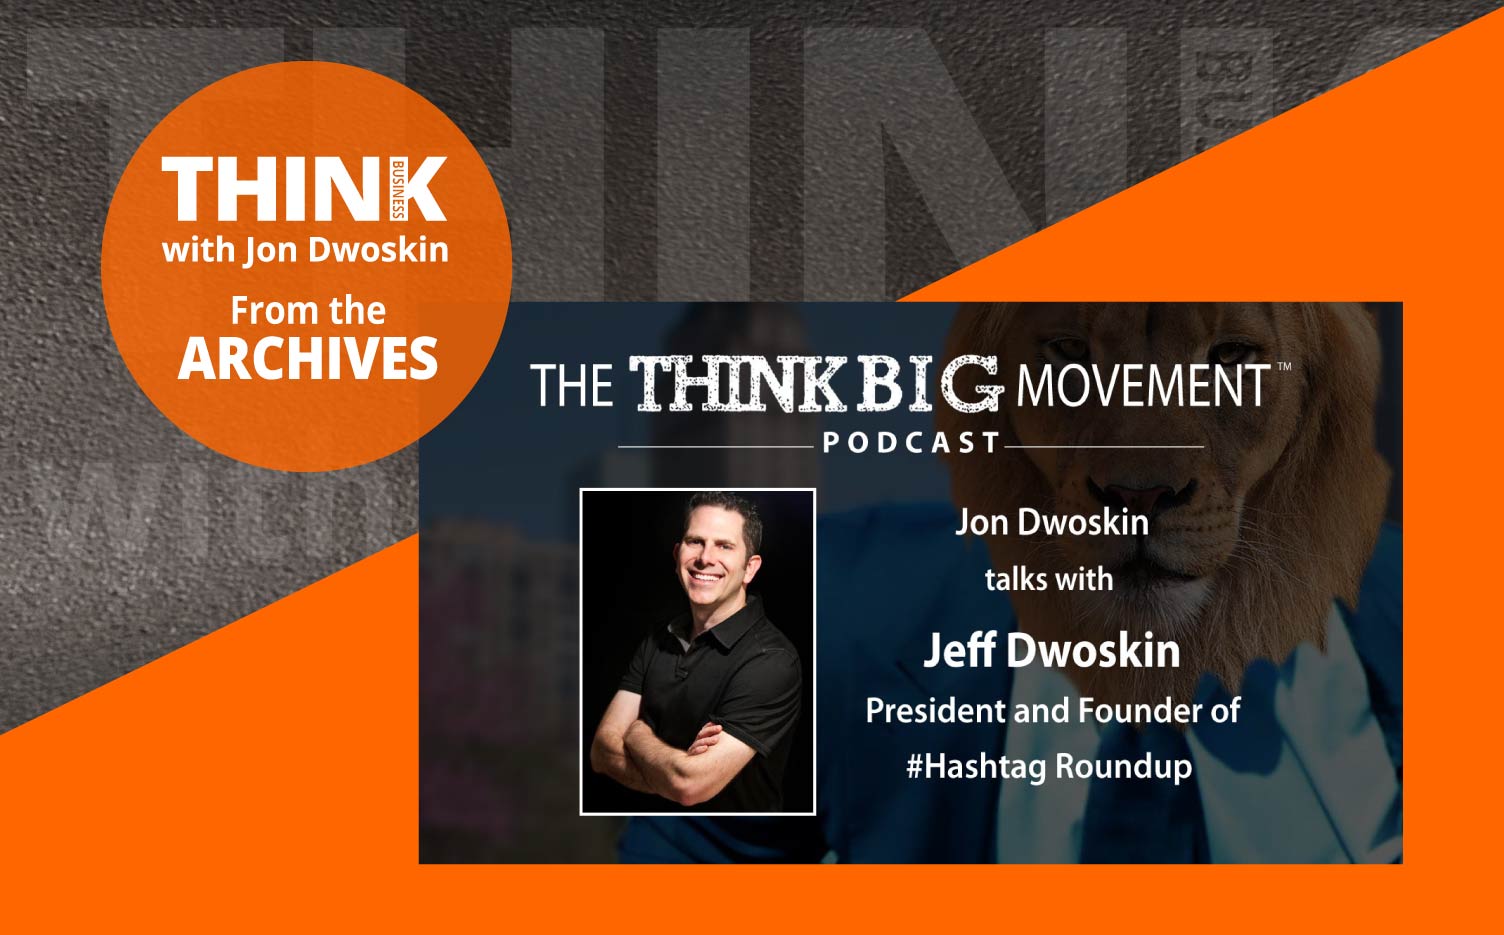 THINK Business Podcast: Jon Dwoskin Interviews Jeff Dwoskin, President and Founder of #Hashtag Roundup